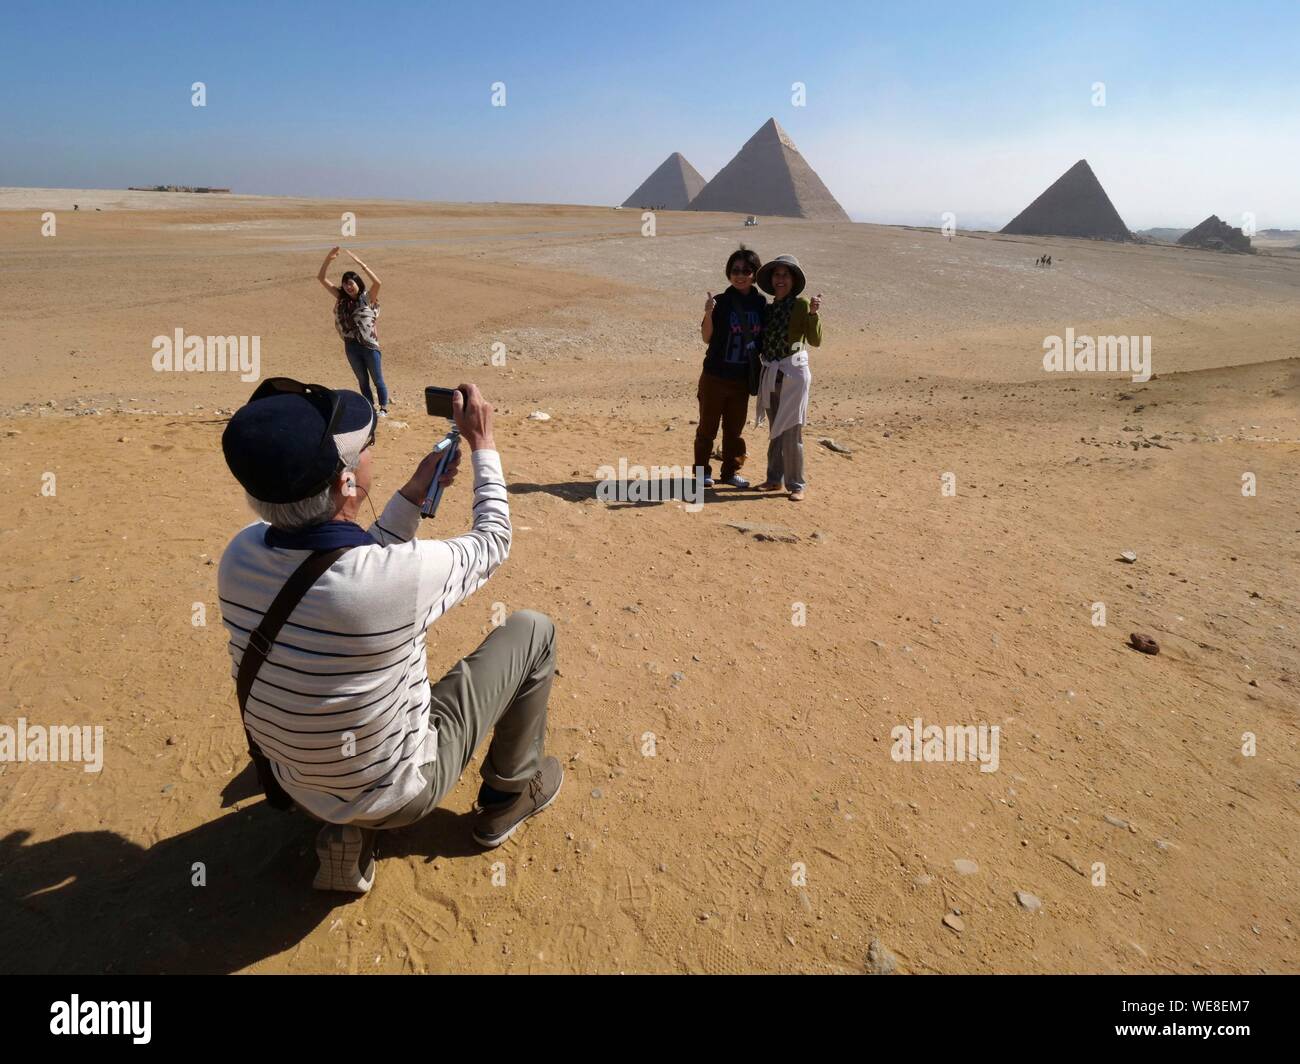 Egypt, Cairo, Giza, UNESCO Heritage Site, Pyramids of Giza, Group of tourists photographing in front of the pyramids of Kheops, Khephren and Mykerinos Stock Photo